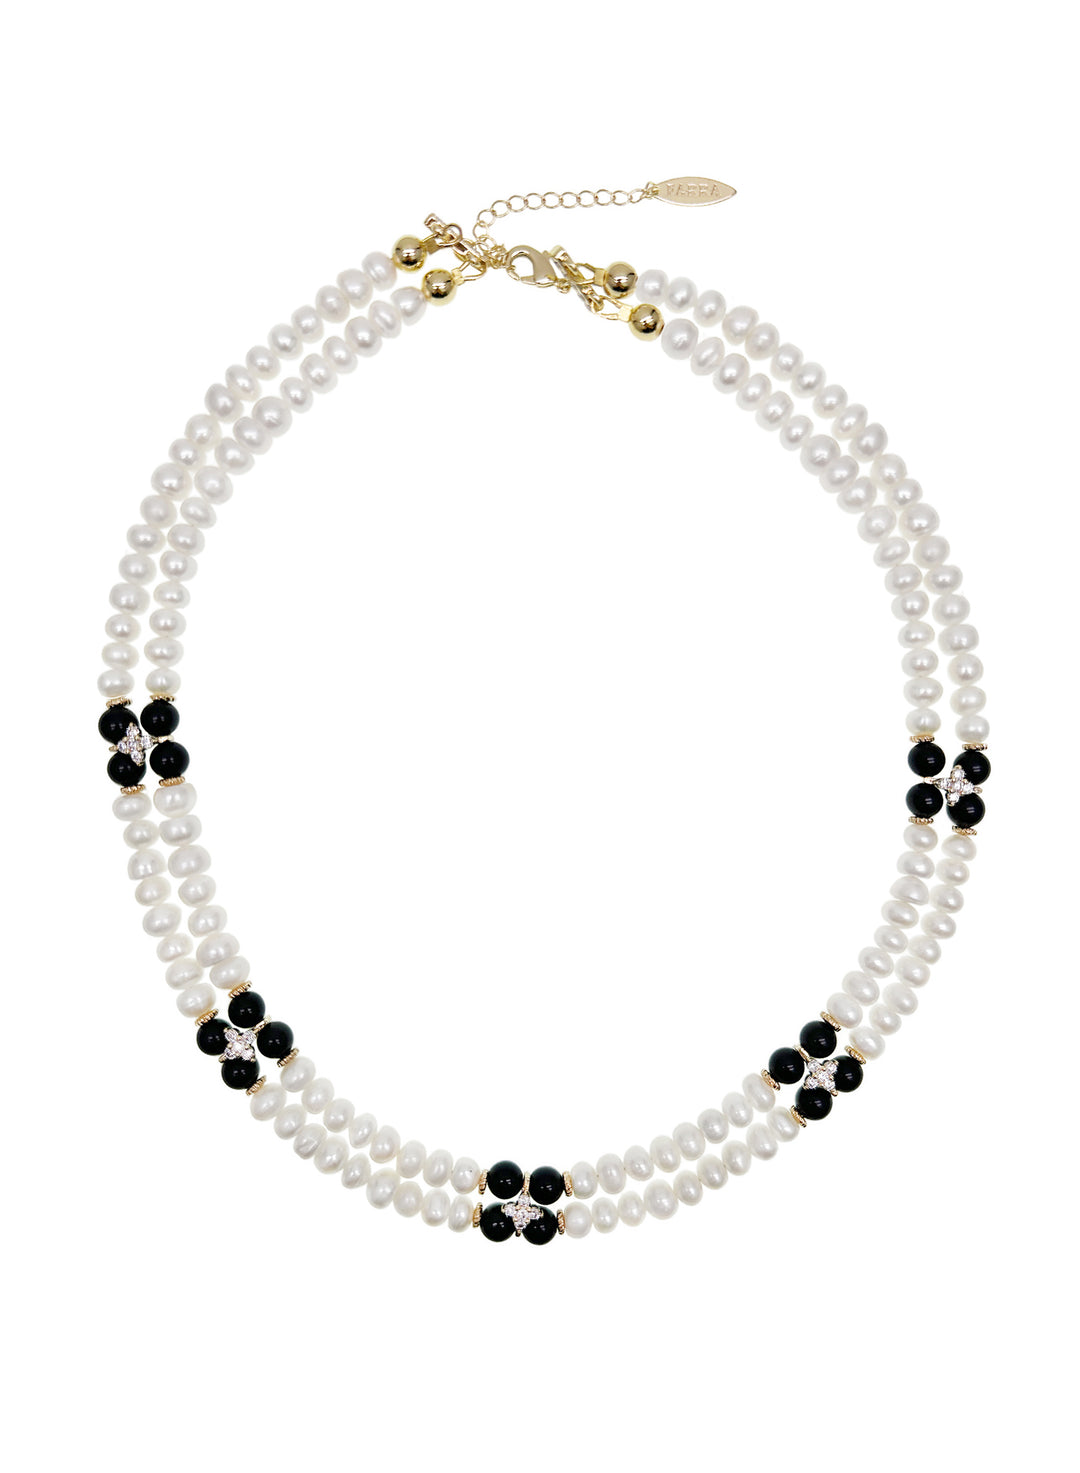 Freshwater Pearls with Black Obsidian and Zircon Stone Statement Collar Necklace LN070 - FARRA